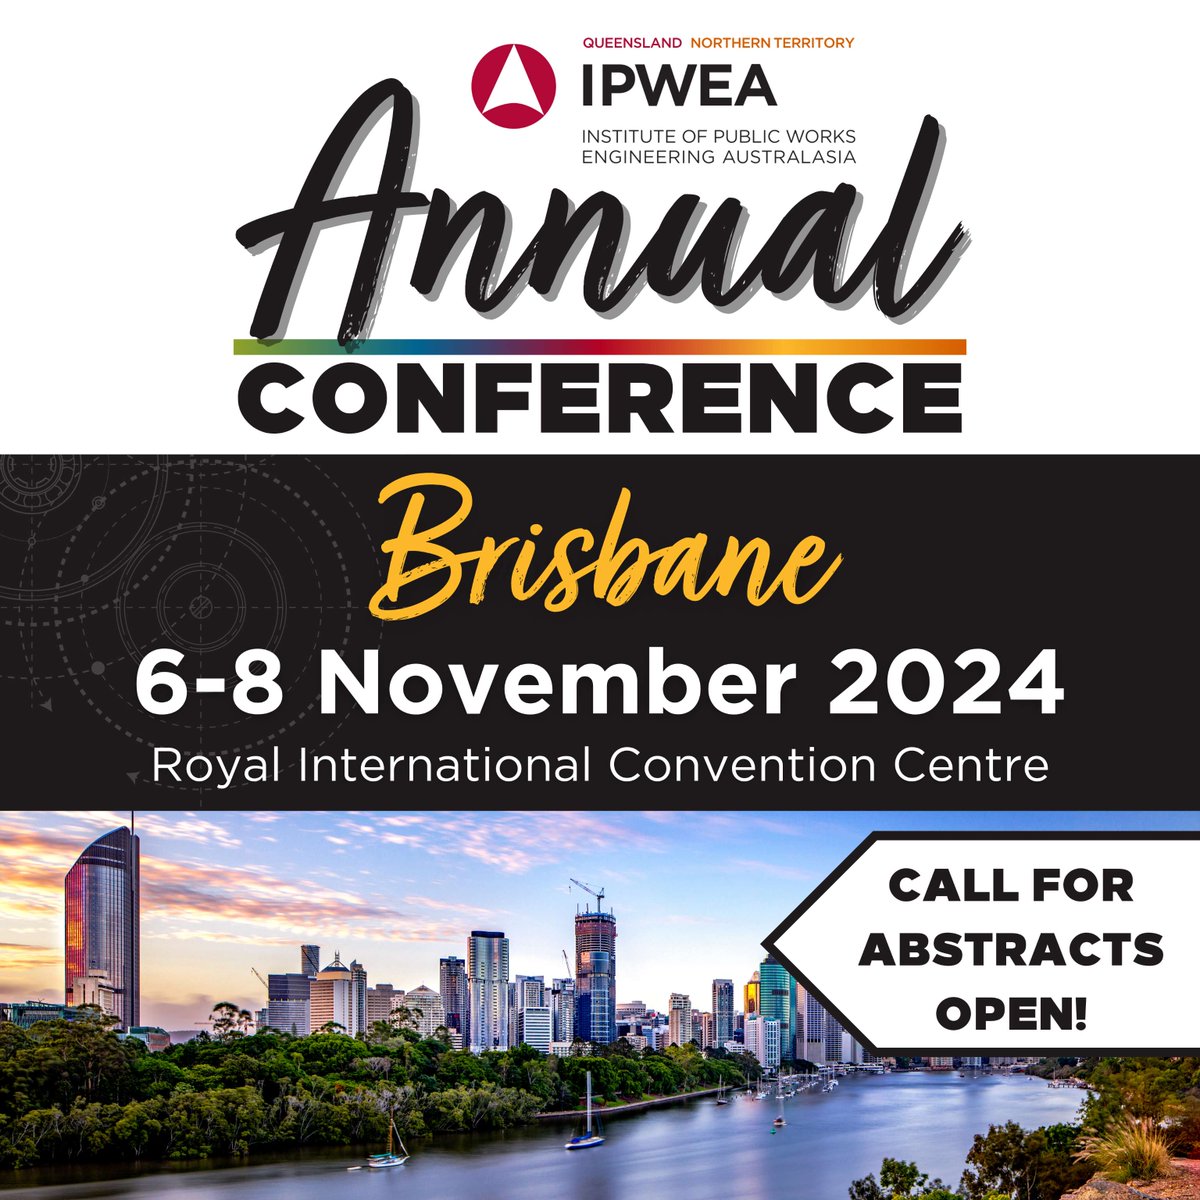 📣 Abstract submissions are now open for the 2024 IPWEA-QNT Annual Conference!

Don't miss out on this invaluable opportunity to present and connect with fellow industry peers.

Submit your abstract today! 👉ow.ly/C2aT50Rt8ZK

#IPWEAQNT24 #CallForAbstracts